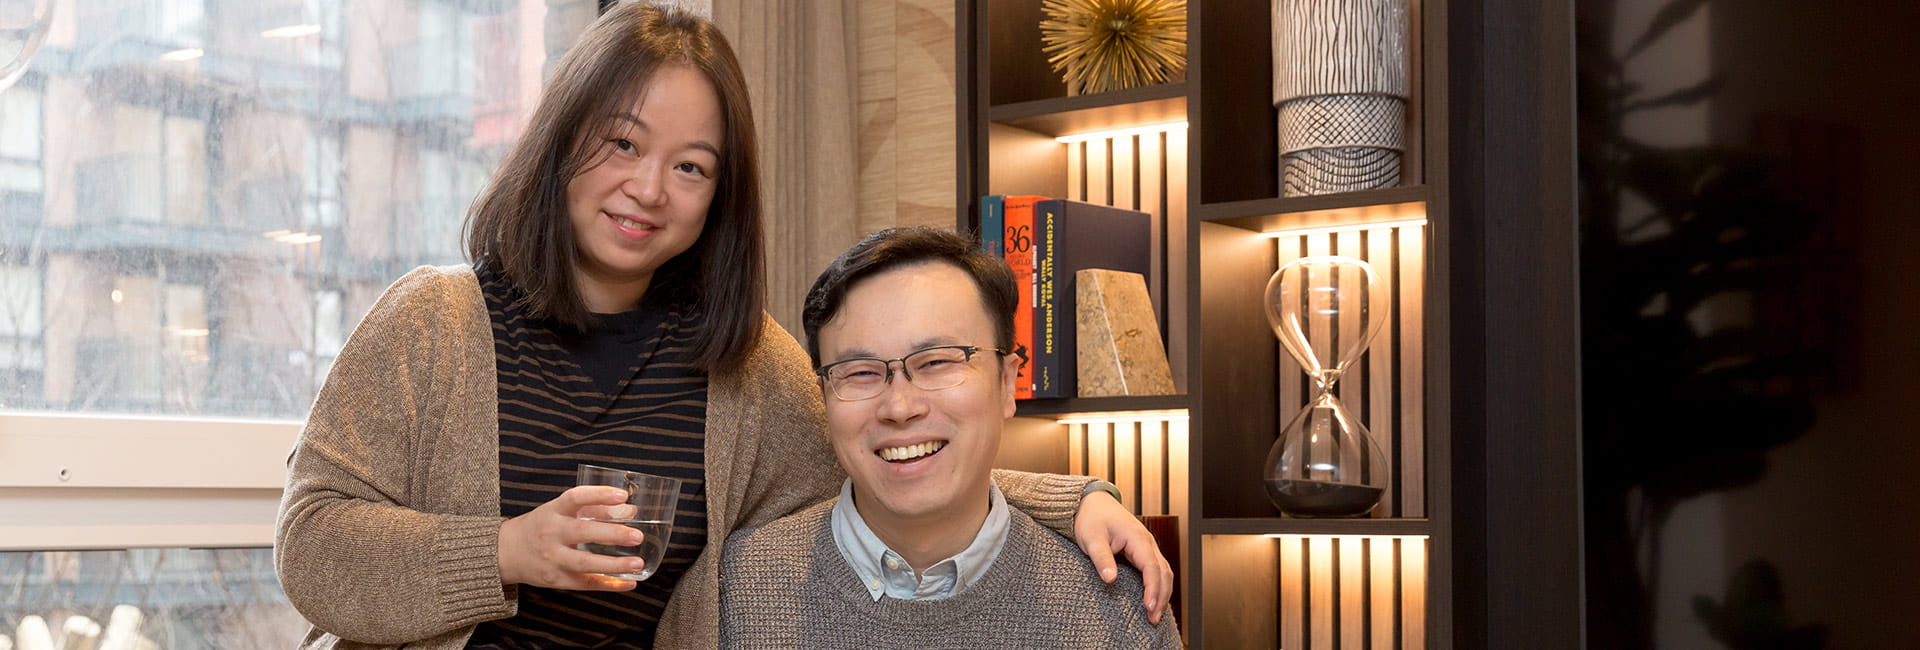 Junsheng and his wife in their apartment